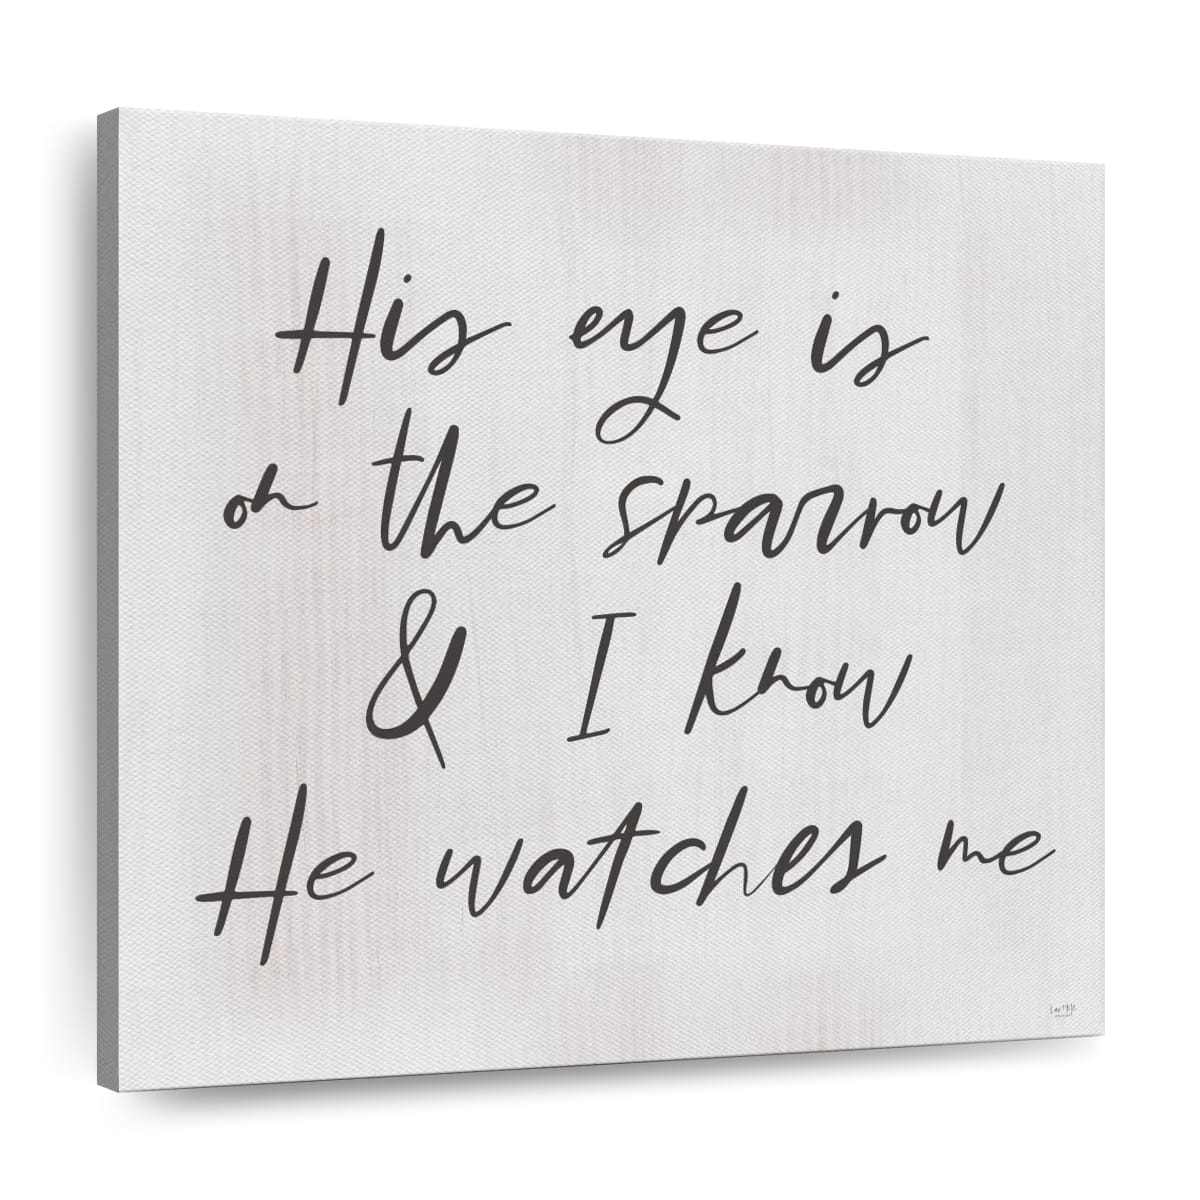 He Watches Me Square Canvas Wall Art - Christian Wall Decor - Christian Wall Hanging